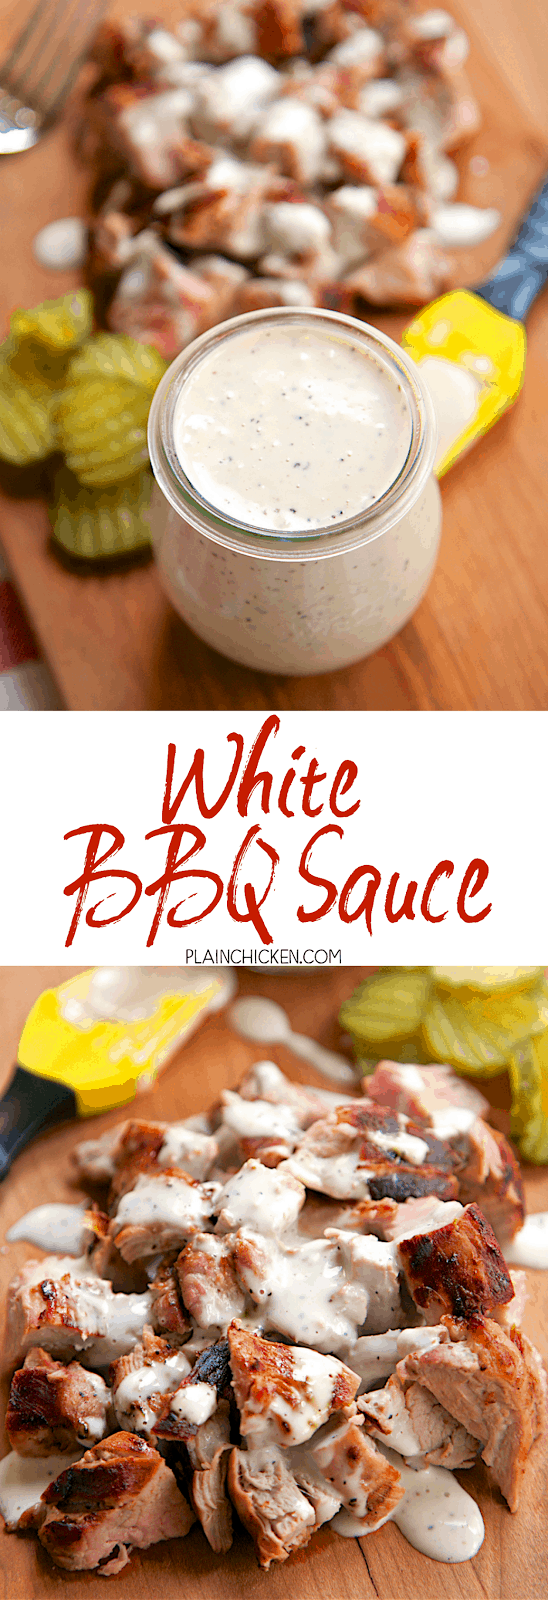 White BBQ Sauce {Alabama White Sauce} - mayonnaise, vinegar, apple juice, horseradish, pepper, lemon, salt, cayenne - Zesty white sauce that is great as a marinade, baste or dipping sauce. Keeps for 2 weeks. Great on pork and chicken!!